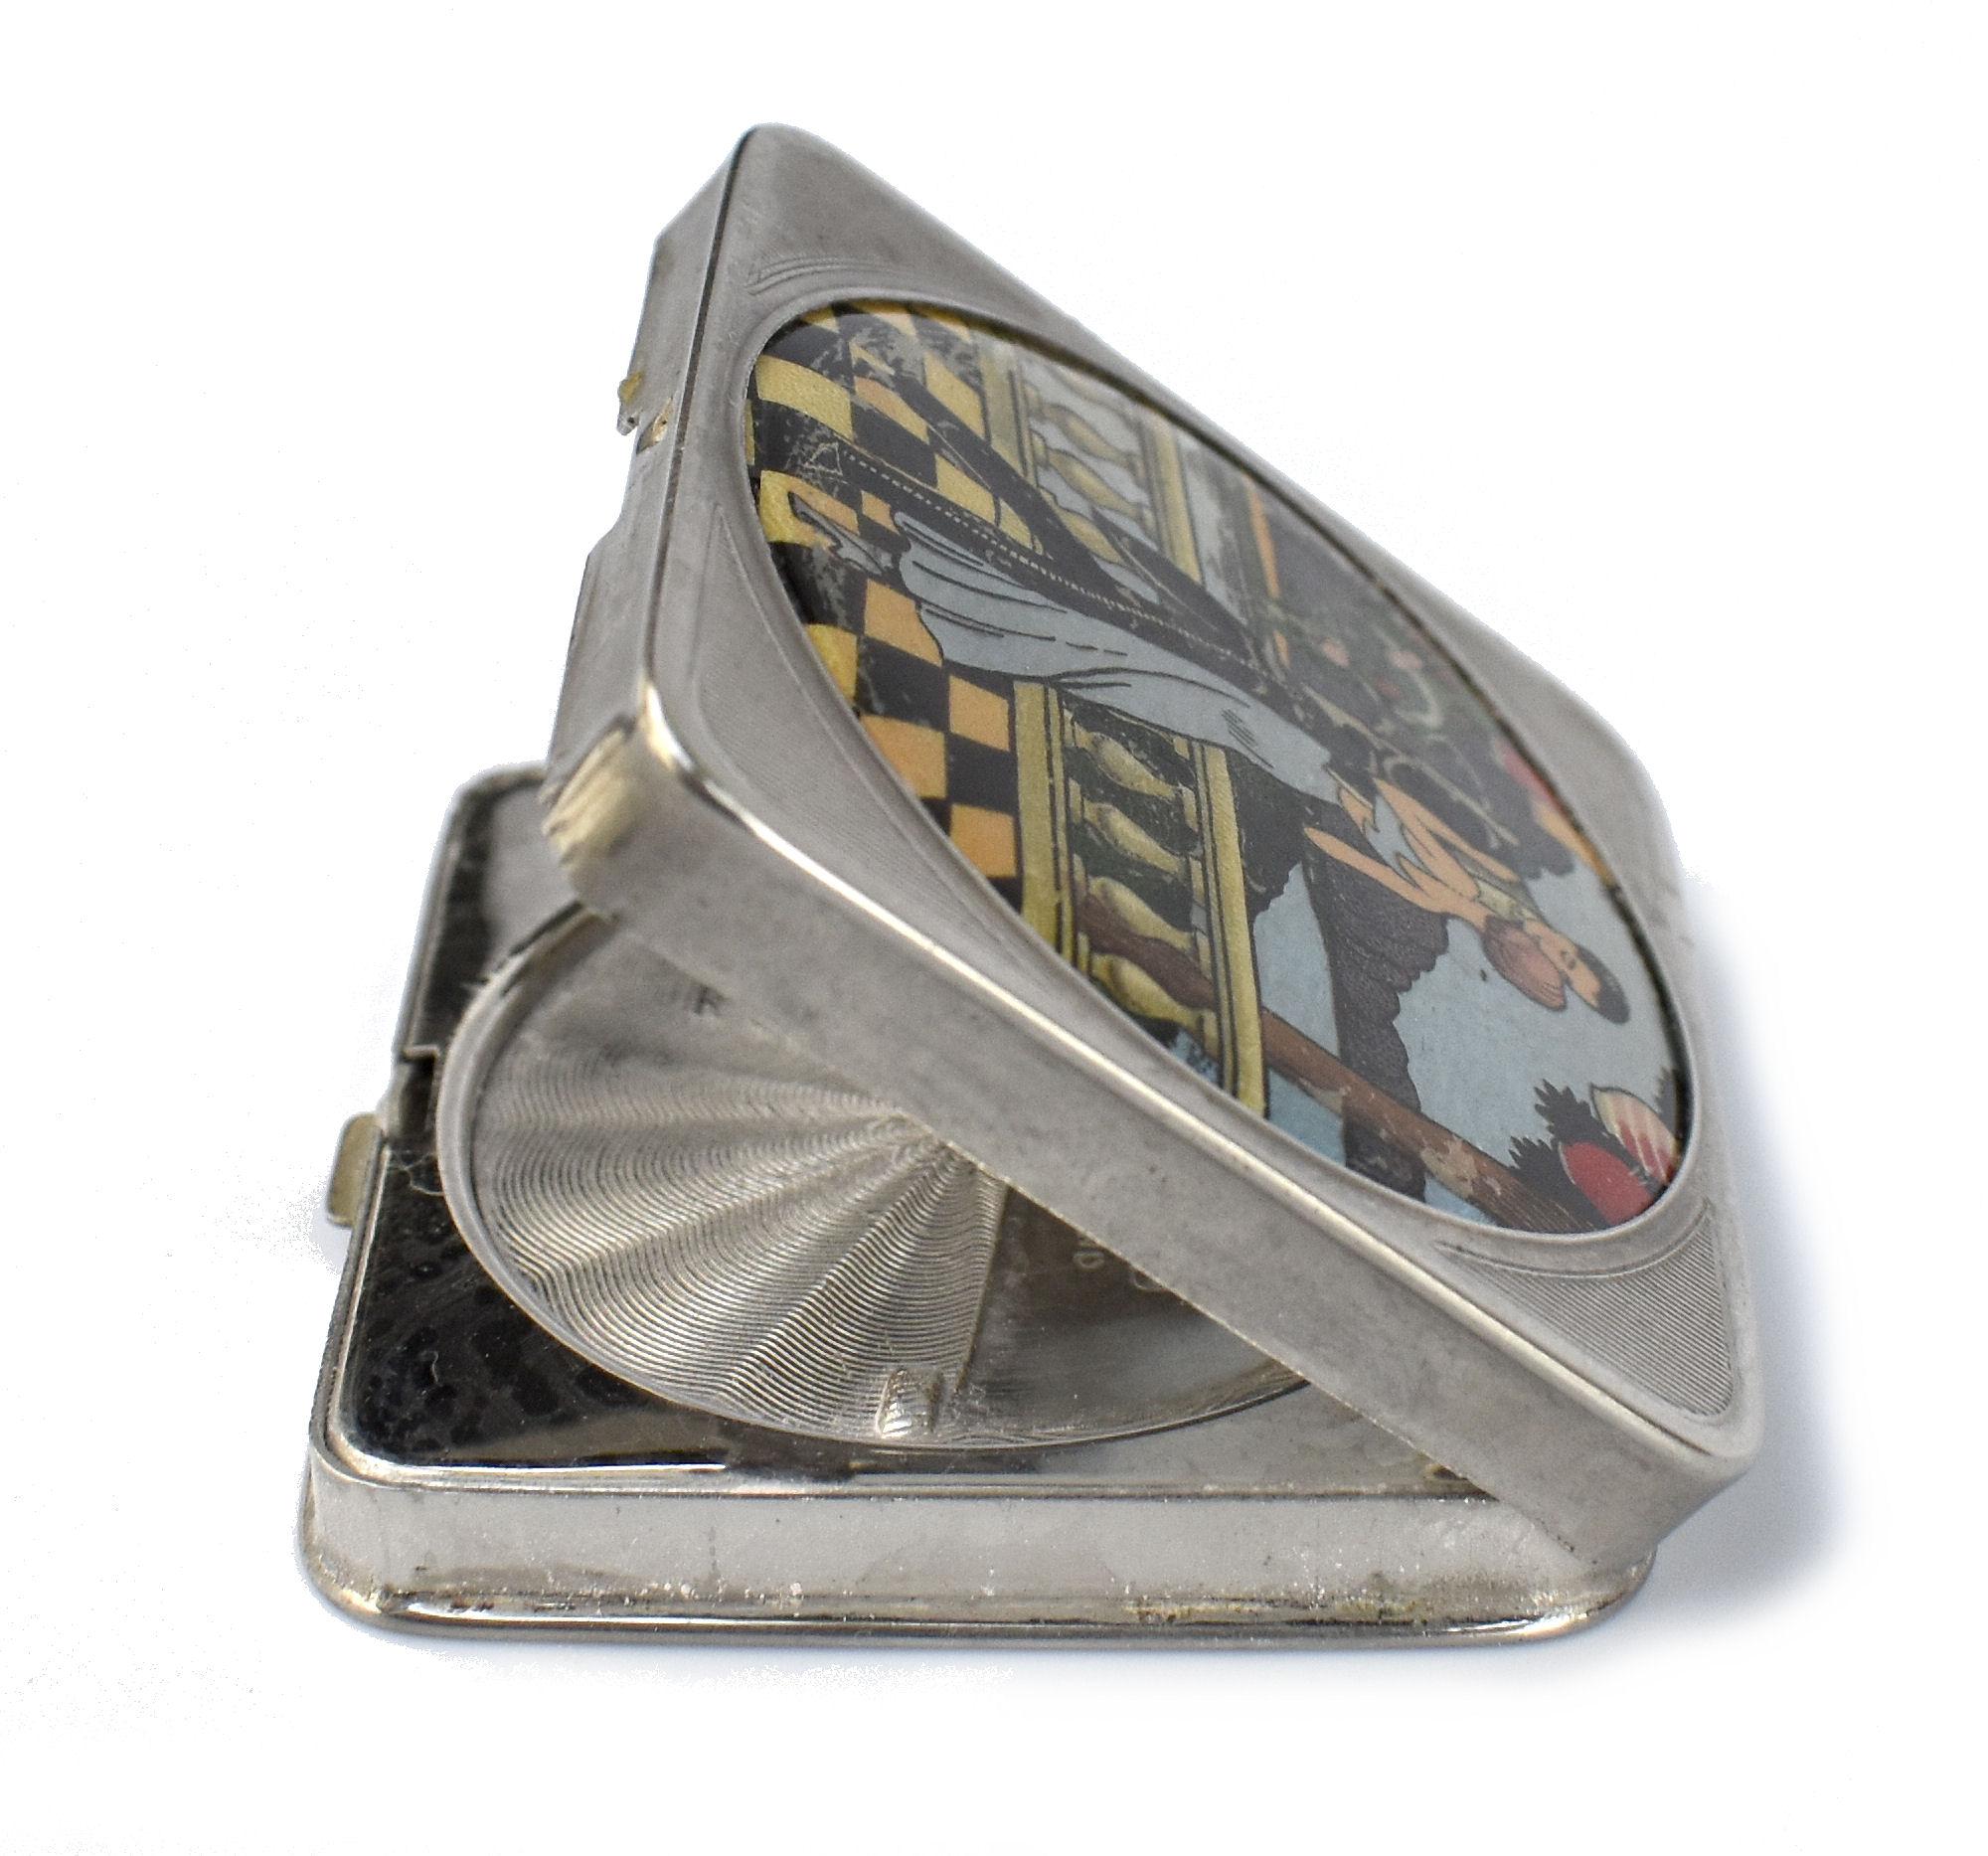 Art Deco Foiled Backed Stratnoid 1930's Ladies Powder Compact 3